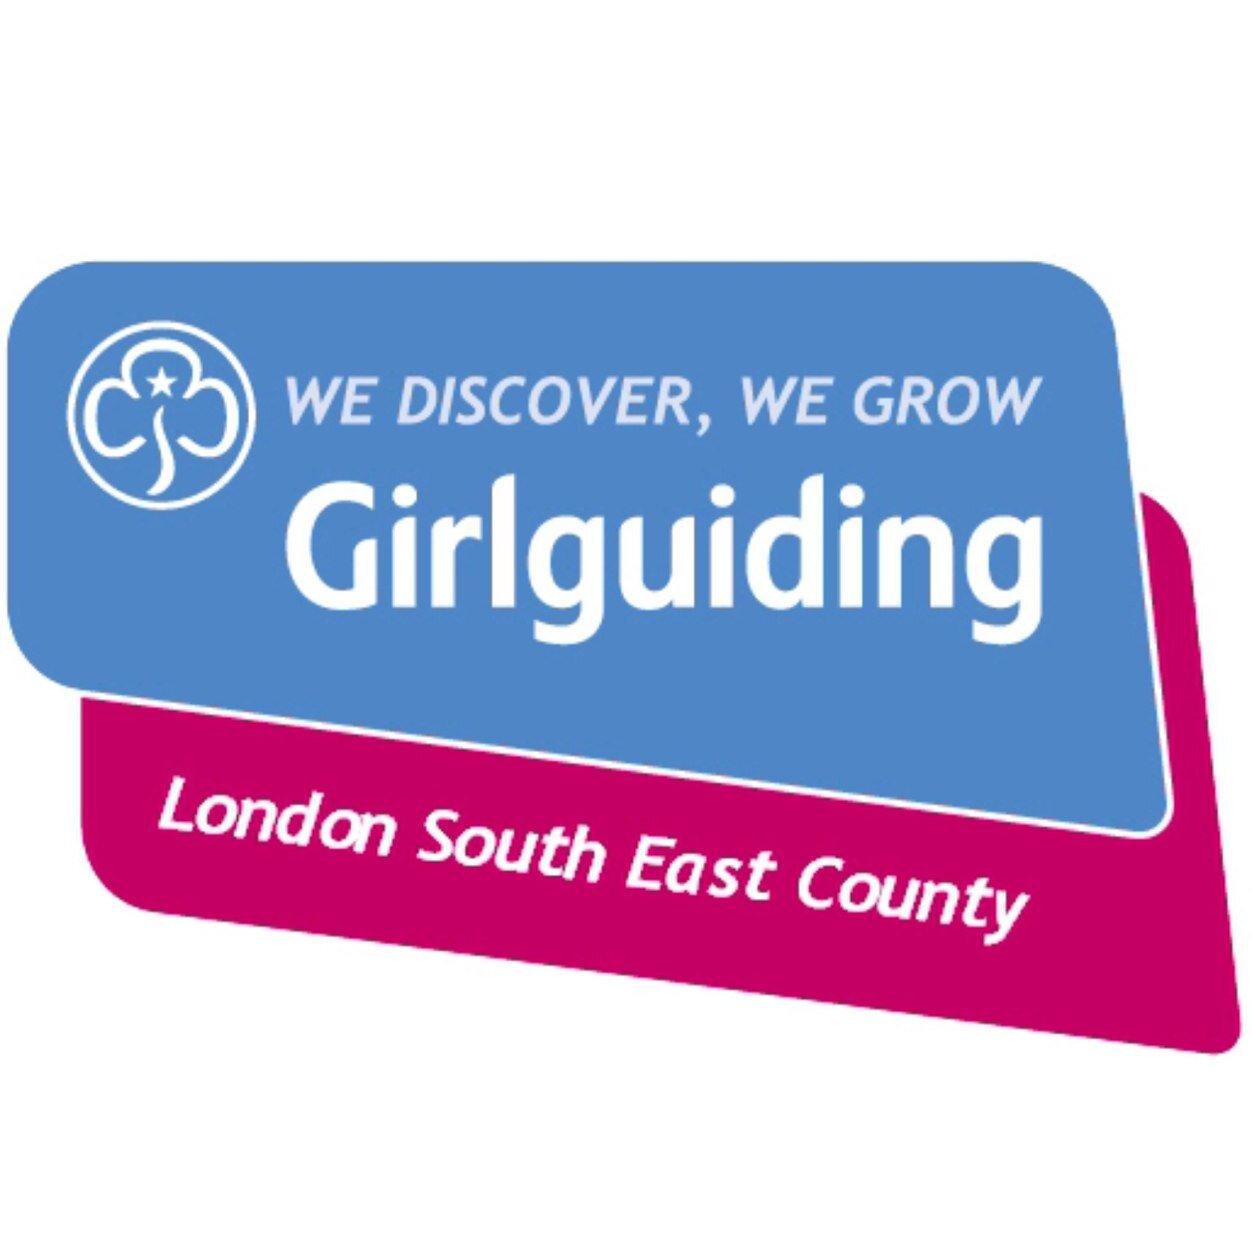 We are Girlguiding London South East, offering an exciting programme of activities for girls 5-25 across the London Boroughs of Southwark, Lewisham & Greenwich.